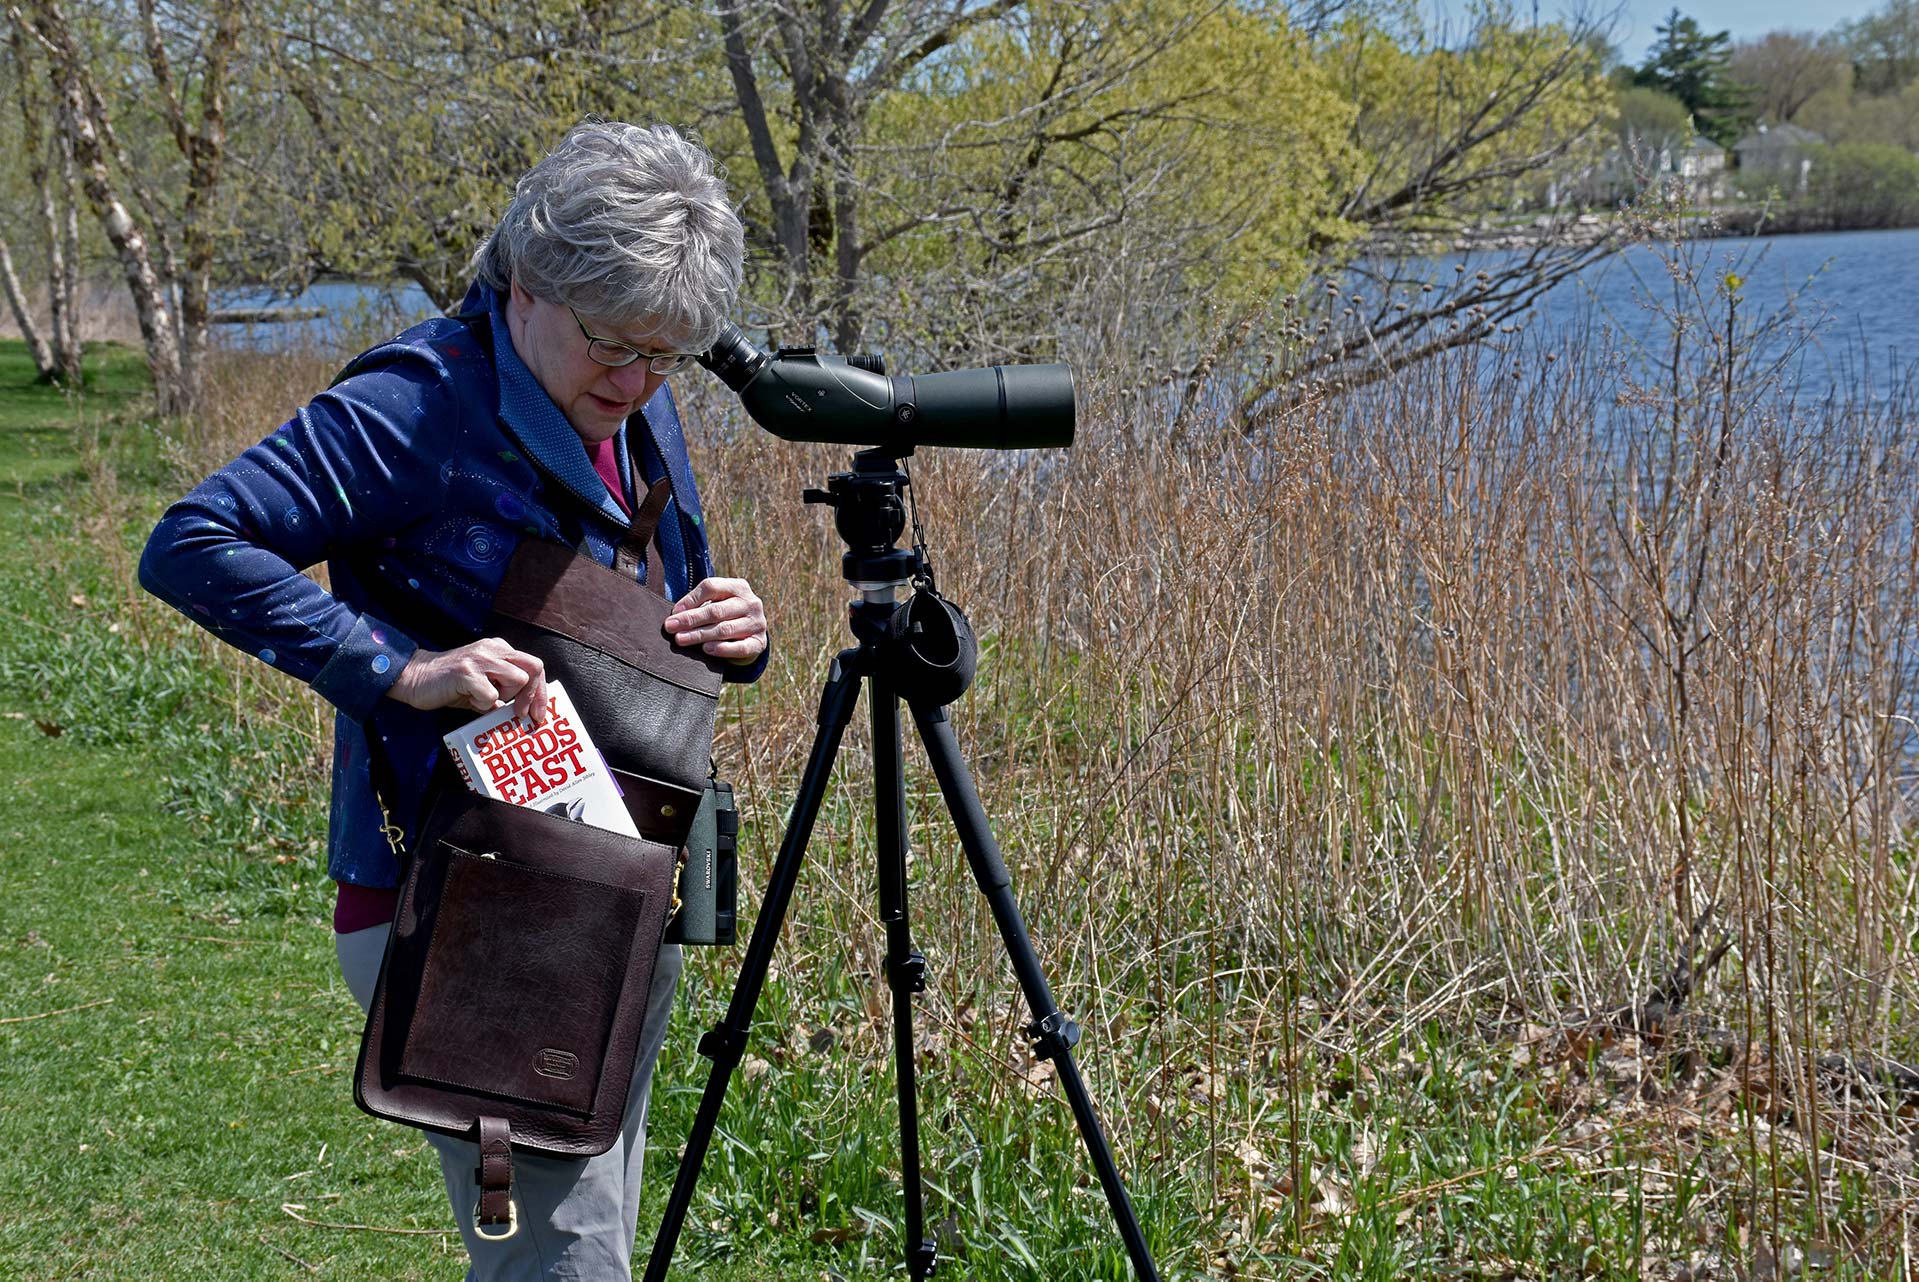 Naturalist using expedition bag for birding